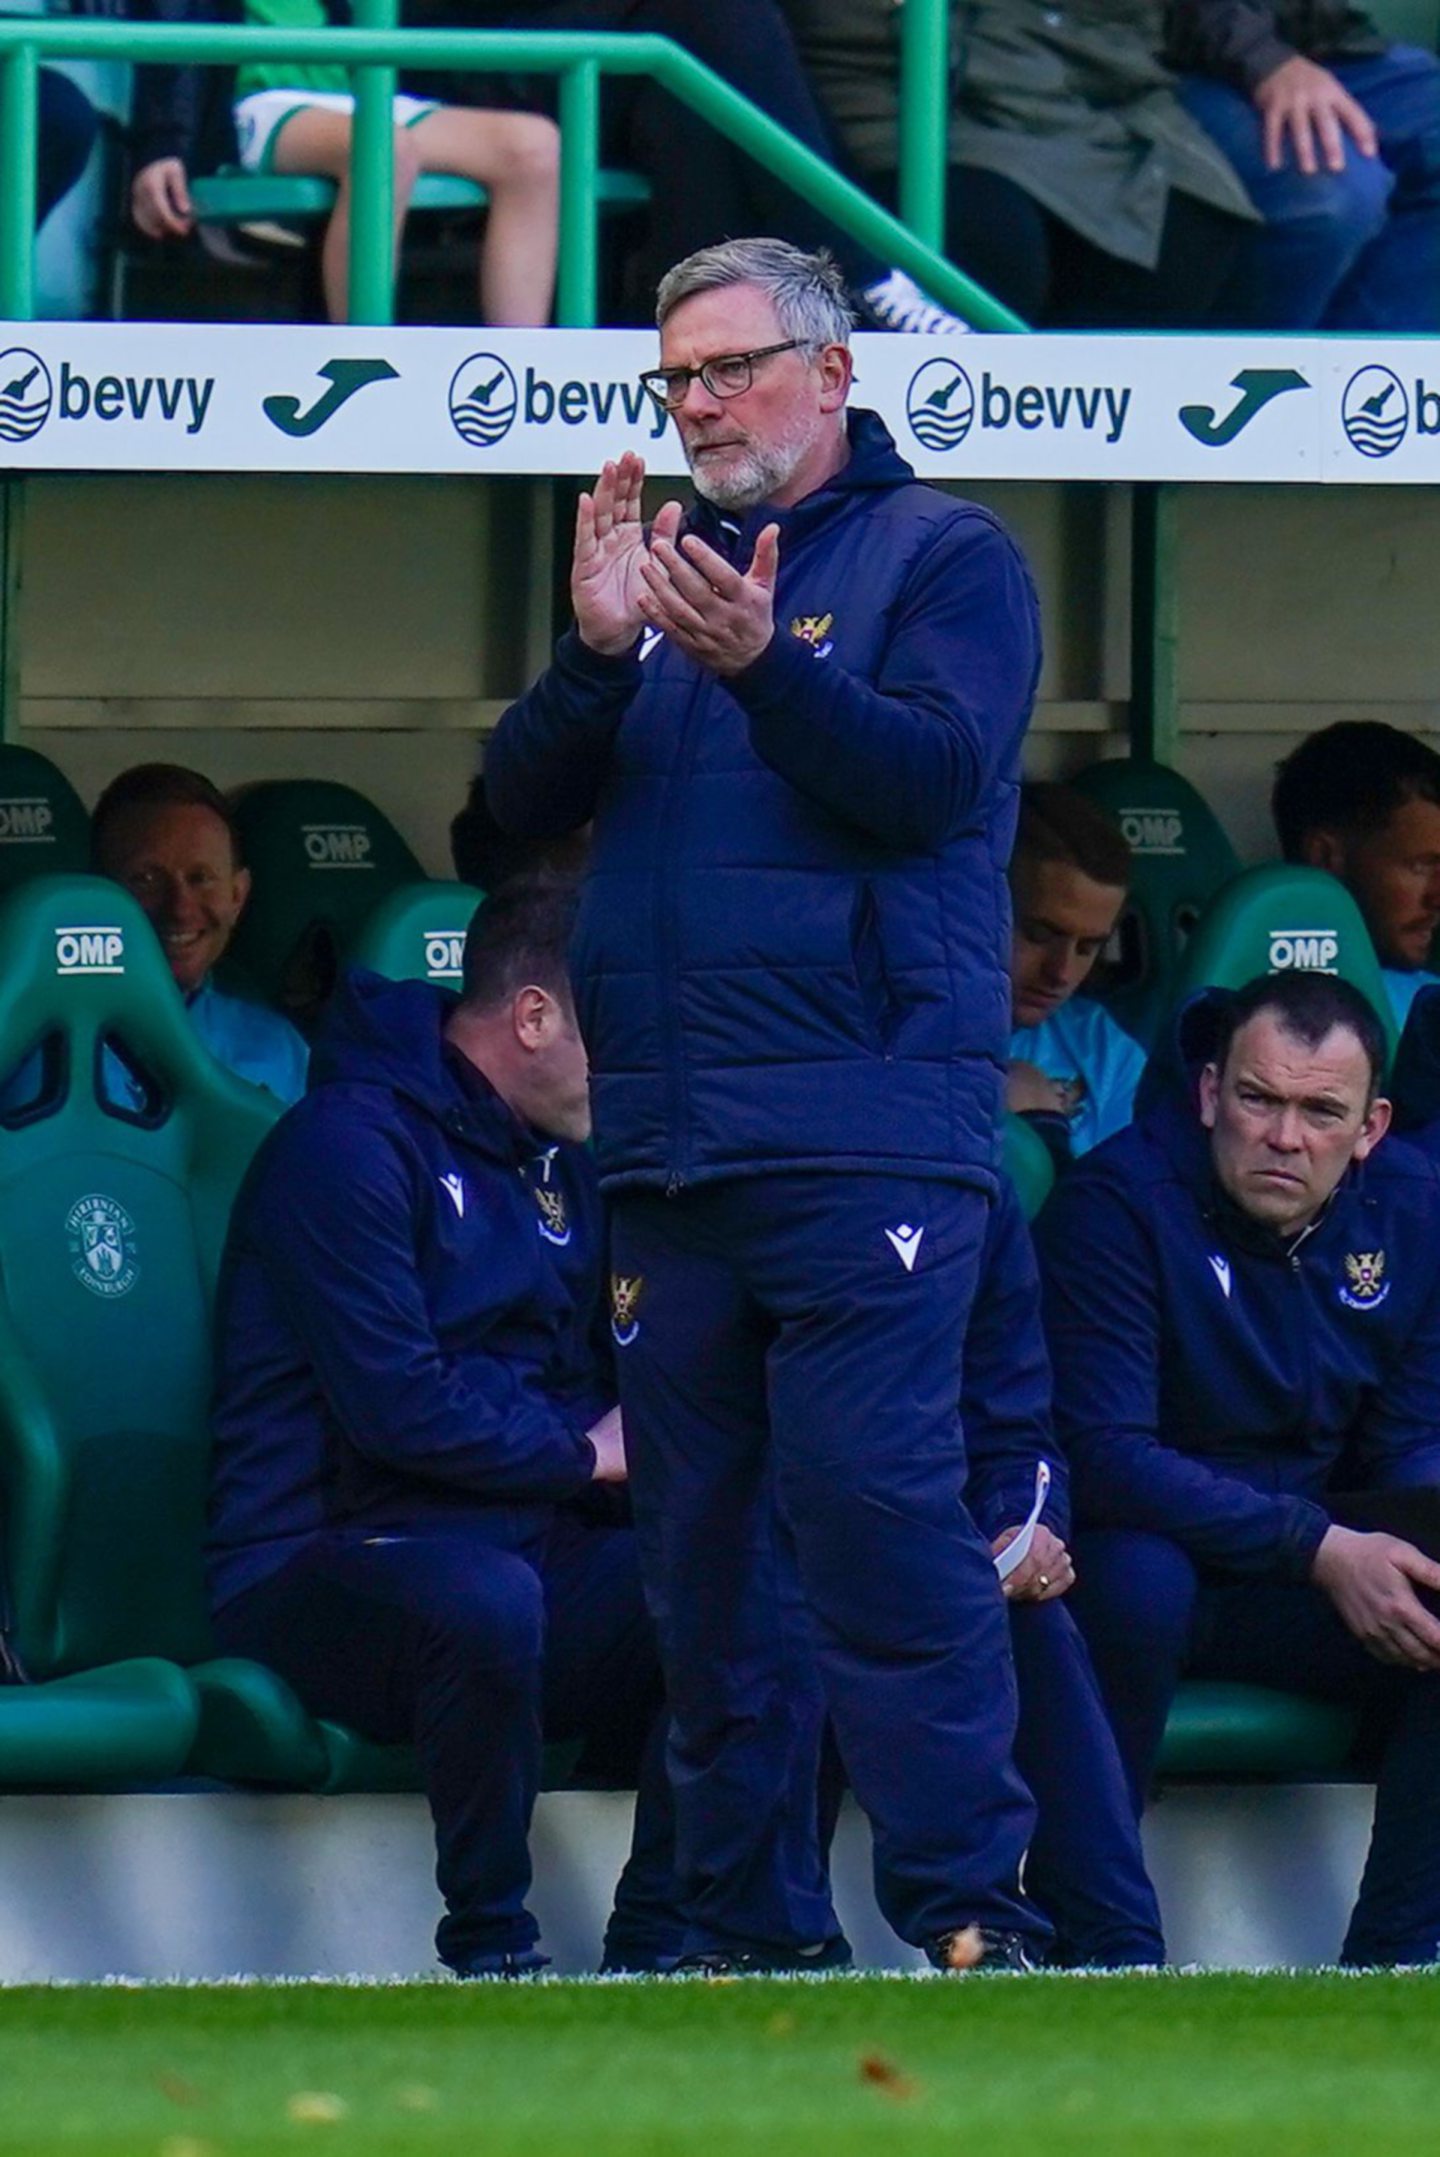 Craig Levein clapping in front of the dug out at Easter Road during Hibs v St Johnstone